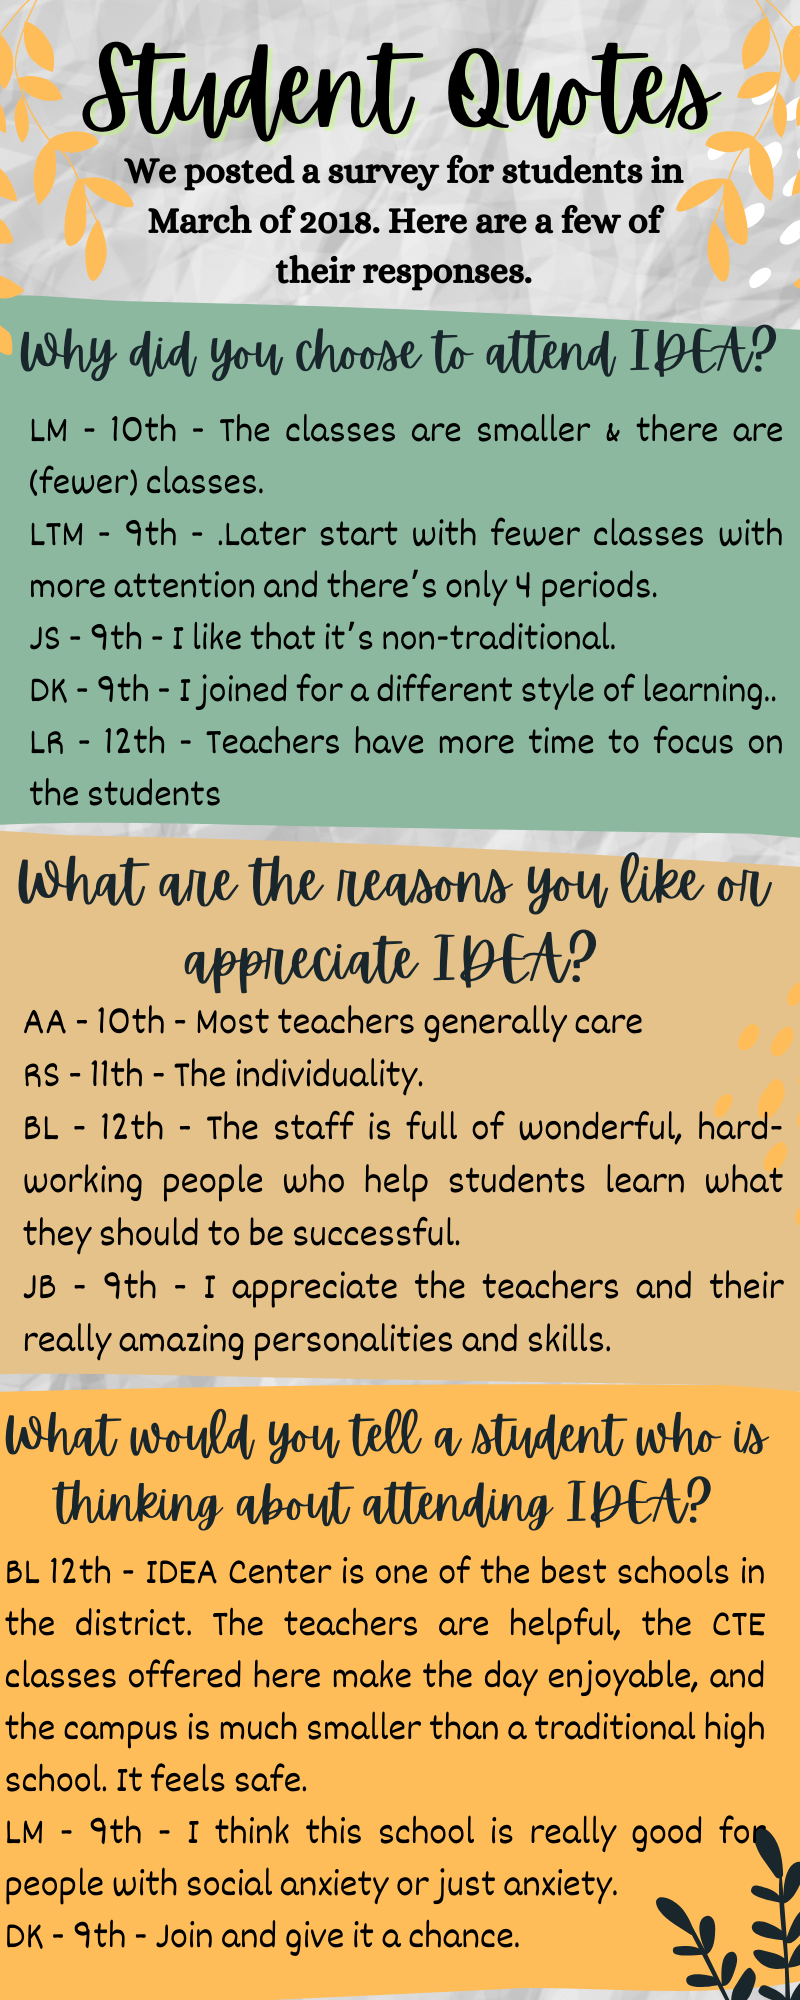 student quotes: We posted a survey for students in March of 2018. Here are a few of their responses.    Why did you choose to attend IDEA?    LM - 10th - The classes are smaller and there are (fewer) classes.  LTM - 9th - ...Later start with fewer classes with more attention and there’s only 4 periods.  JS - 9th - I like that it’s non-traditional.  DK - 9th - I joined for a different style of learning.  RG - 9th - The normal public way of teaching was not working for me so a teacher I had in eighth grade recommended IDEA center (to me).  LR - 12th - Teachers have more time to focus on the students.  CP - 11th - The campus (is) small and the staff are all nice.